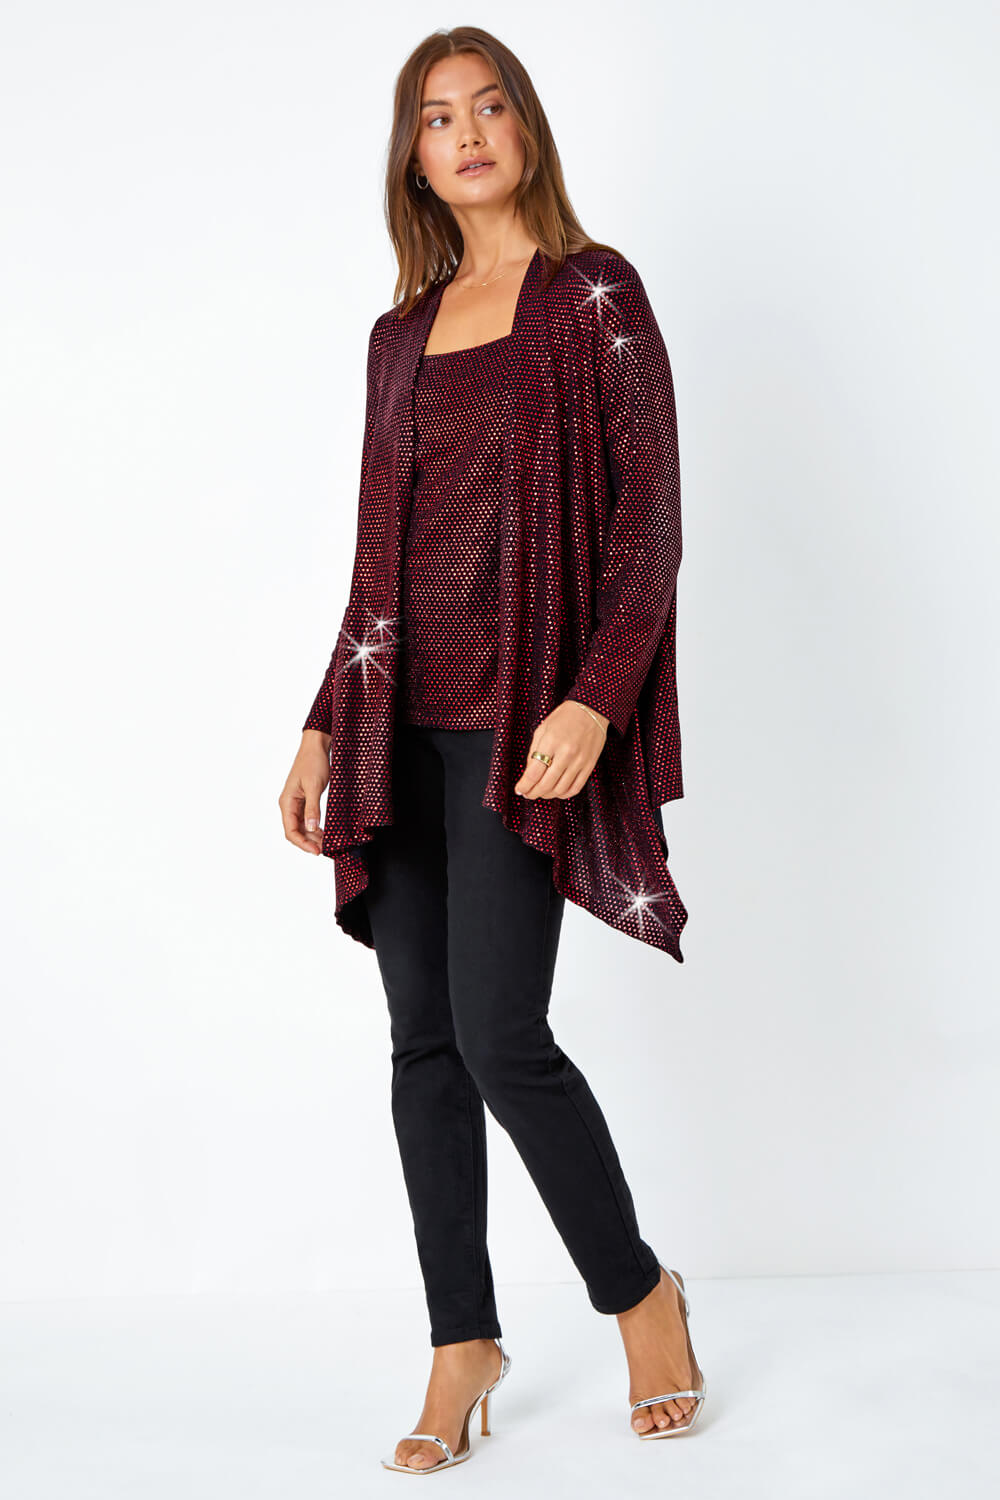 Red Sequin Sparkle Waterfall Stretch Jacket | Roman UK